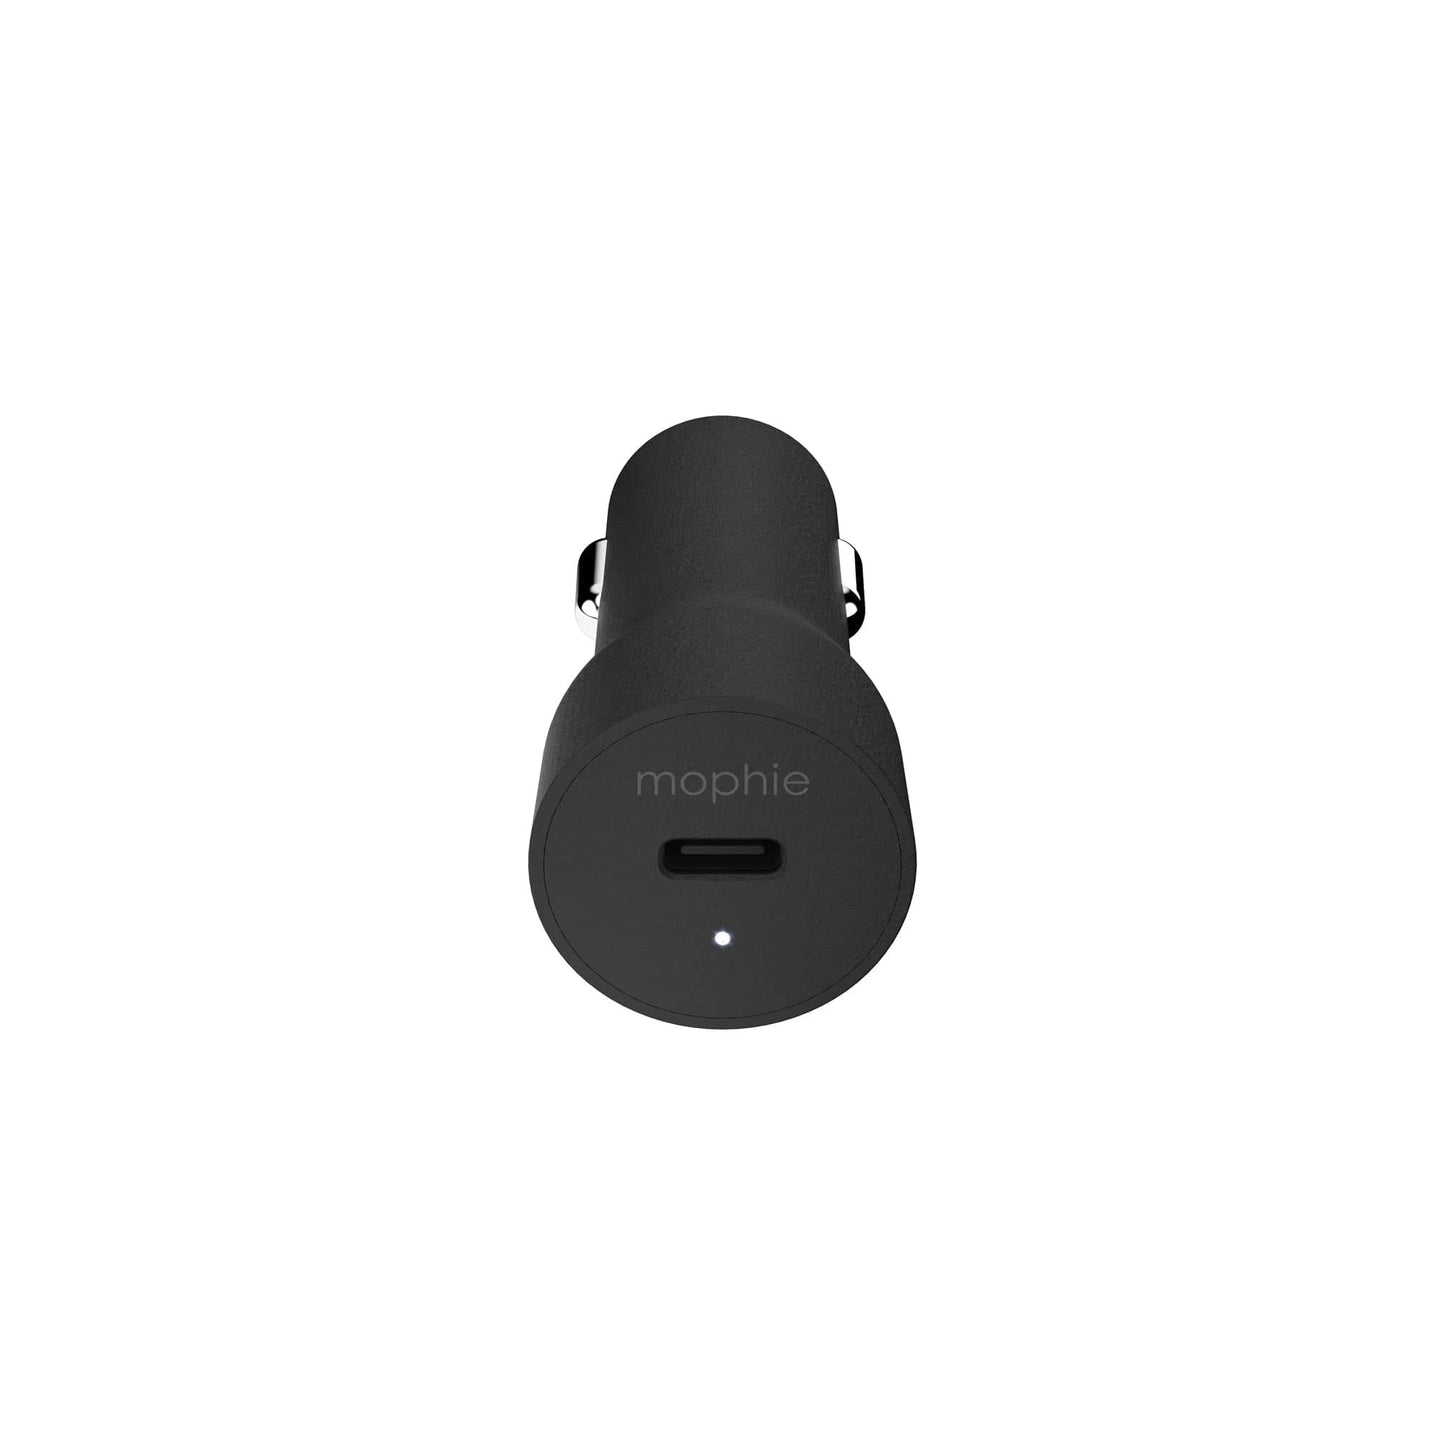 Mophie Car Charger - Accelerated Charging for USB-C Devices-Charging - Car Chargers-MOPHIE-www.PhoneGuy.com.au